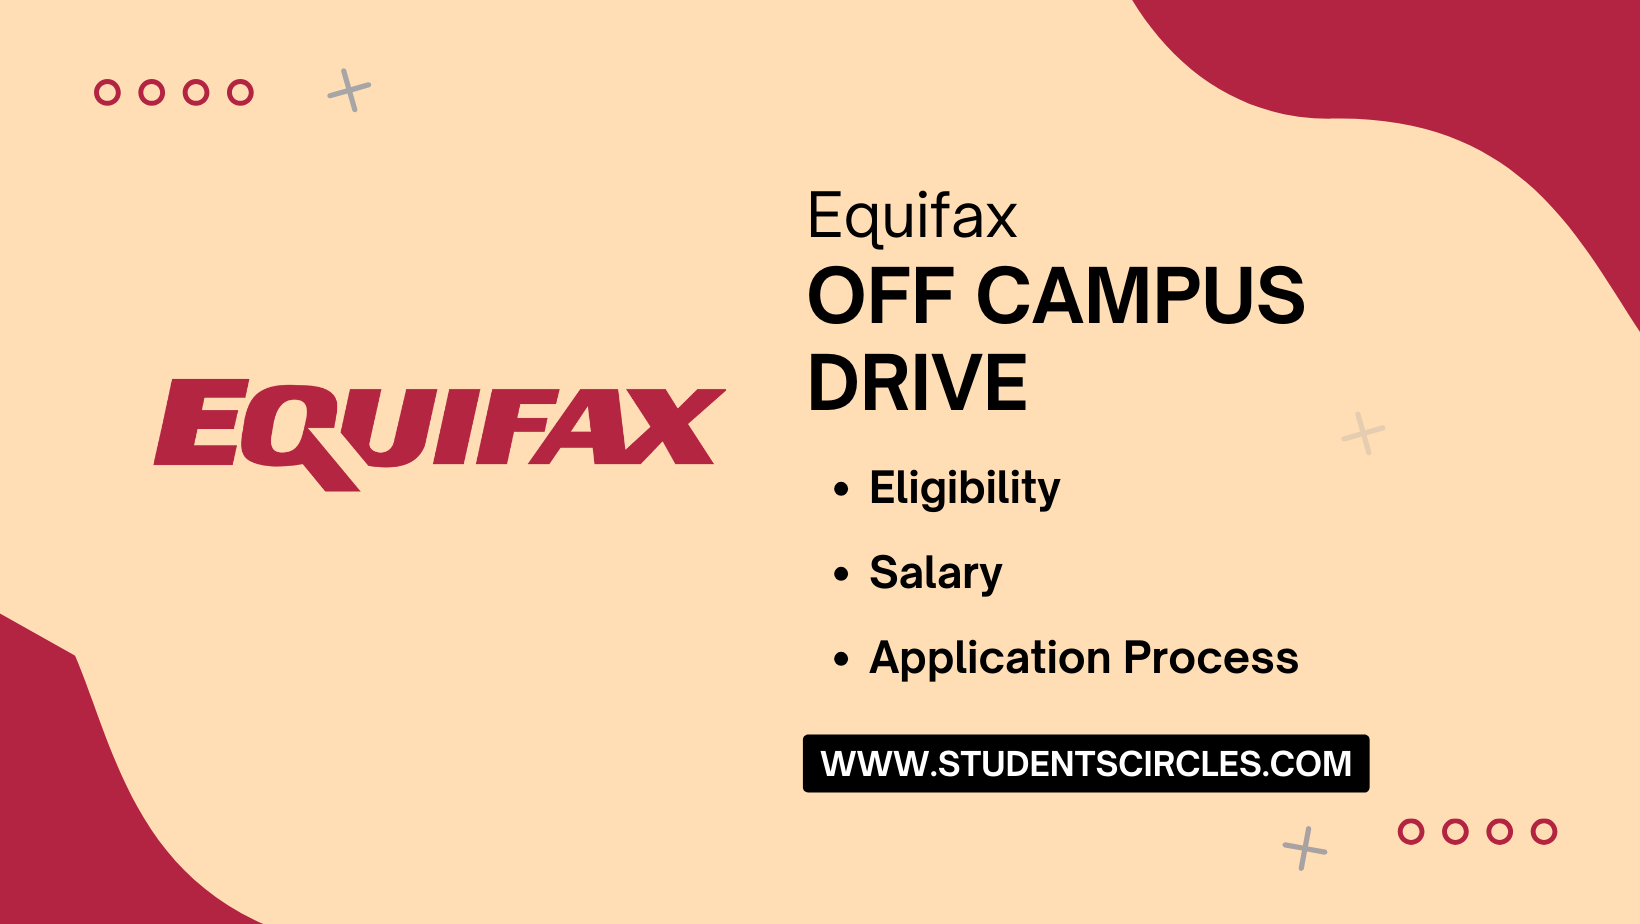 Equifax Off Campus Drive